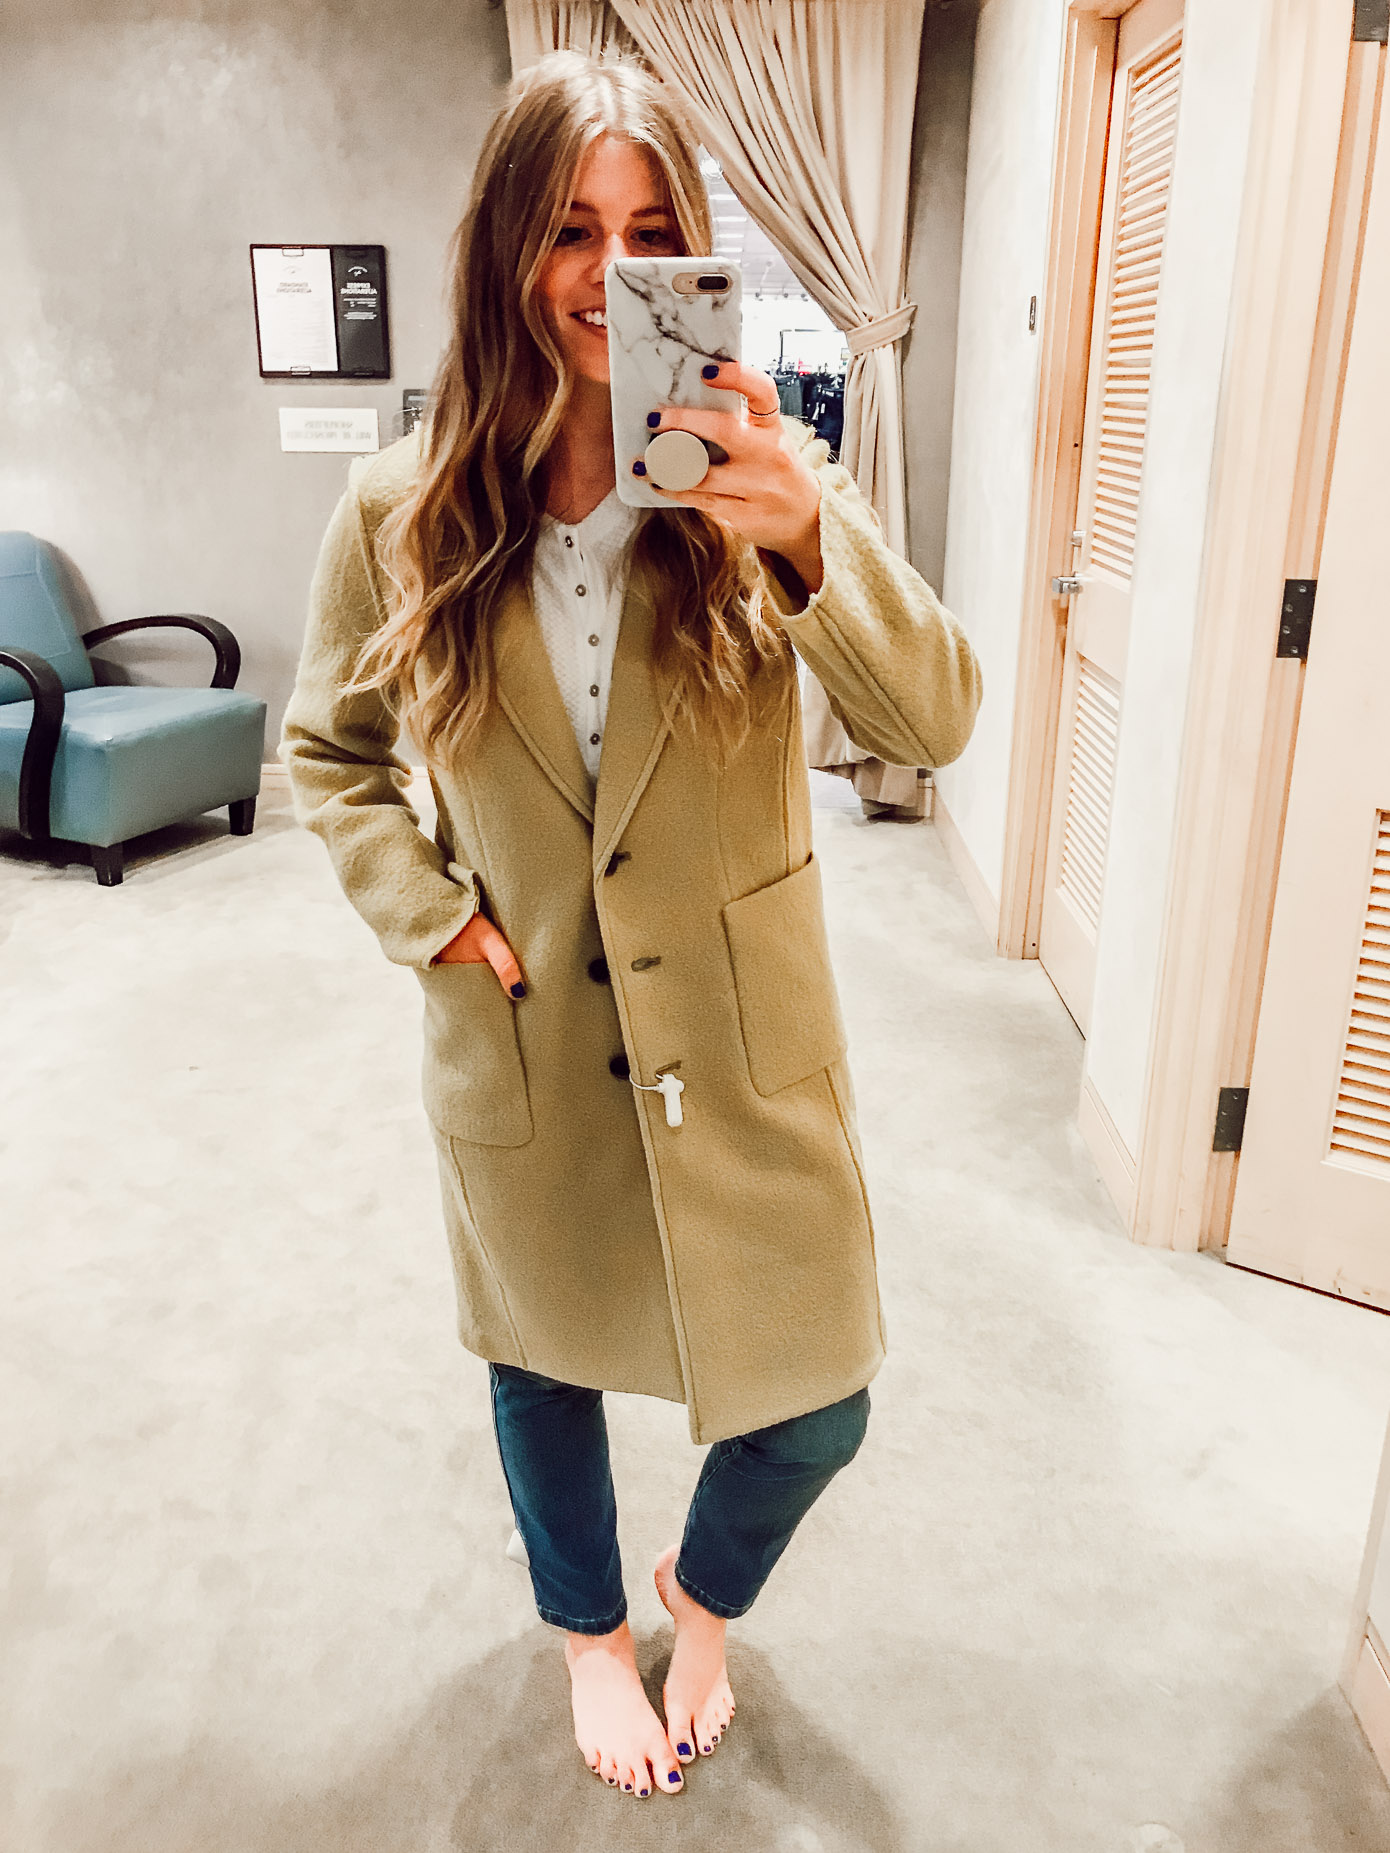 J. Crew Olga Boiled Wool Topcoat | 2018 Nordstrom Anniversary Fitting Room Session featured on Louella Reese Life & Style Blog